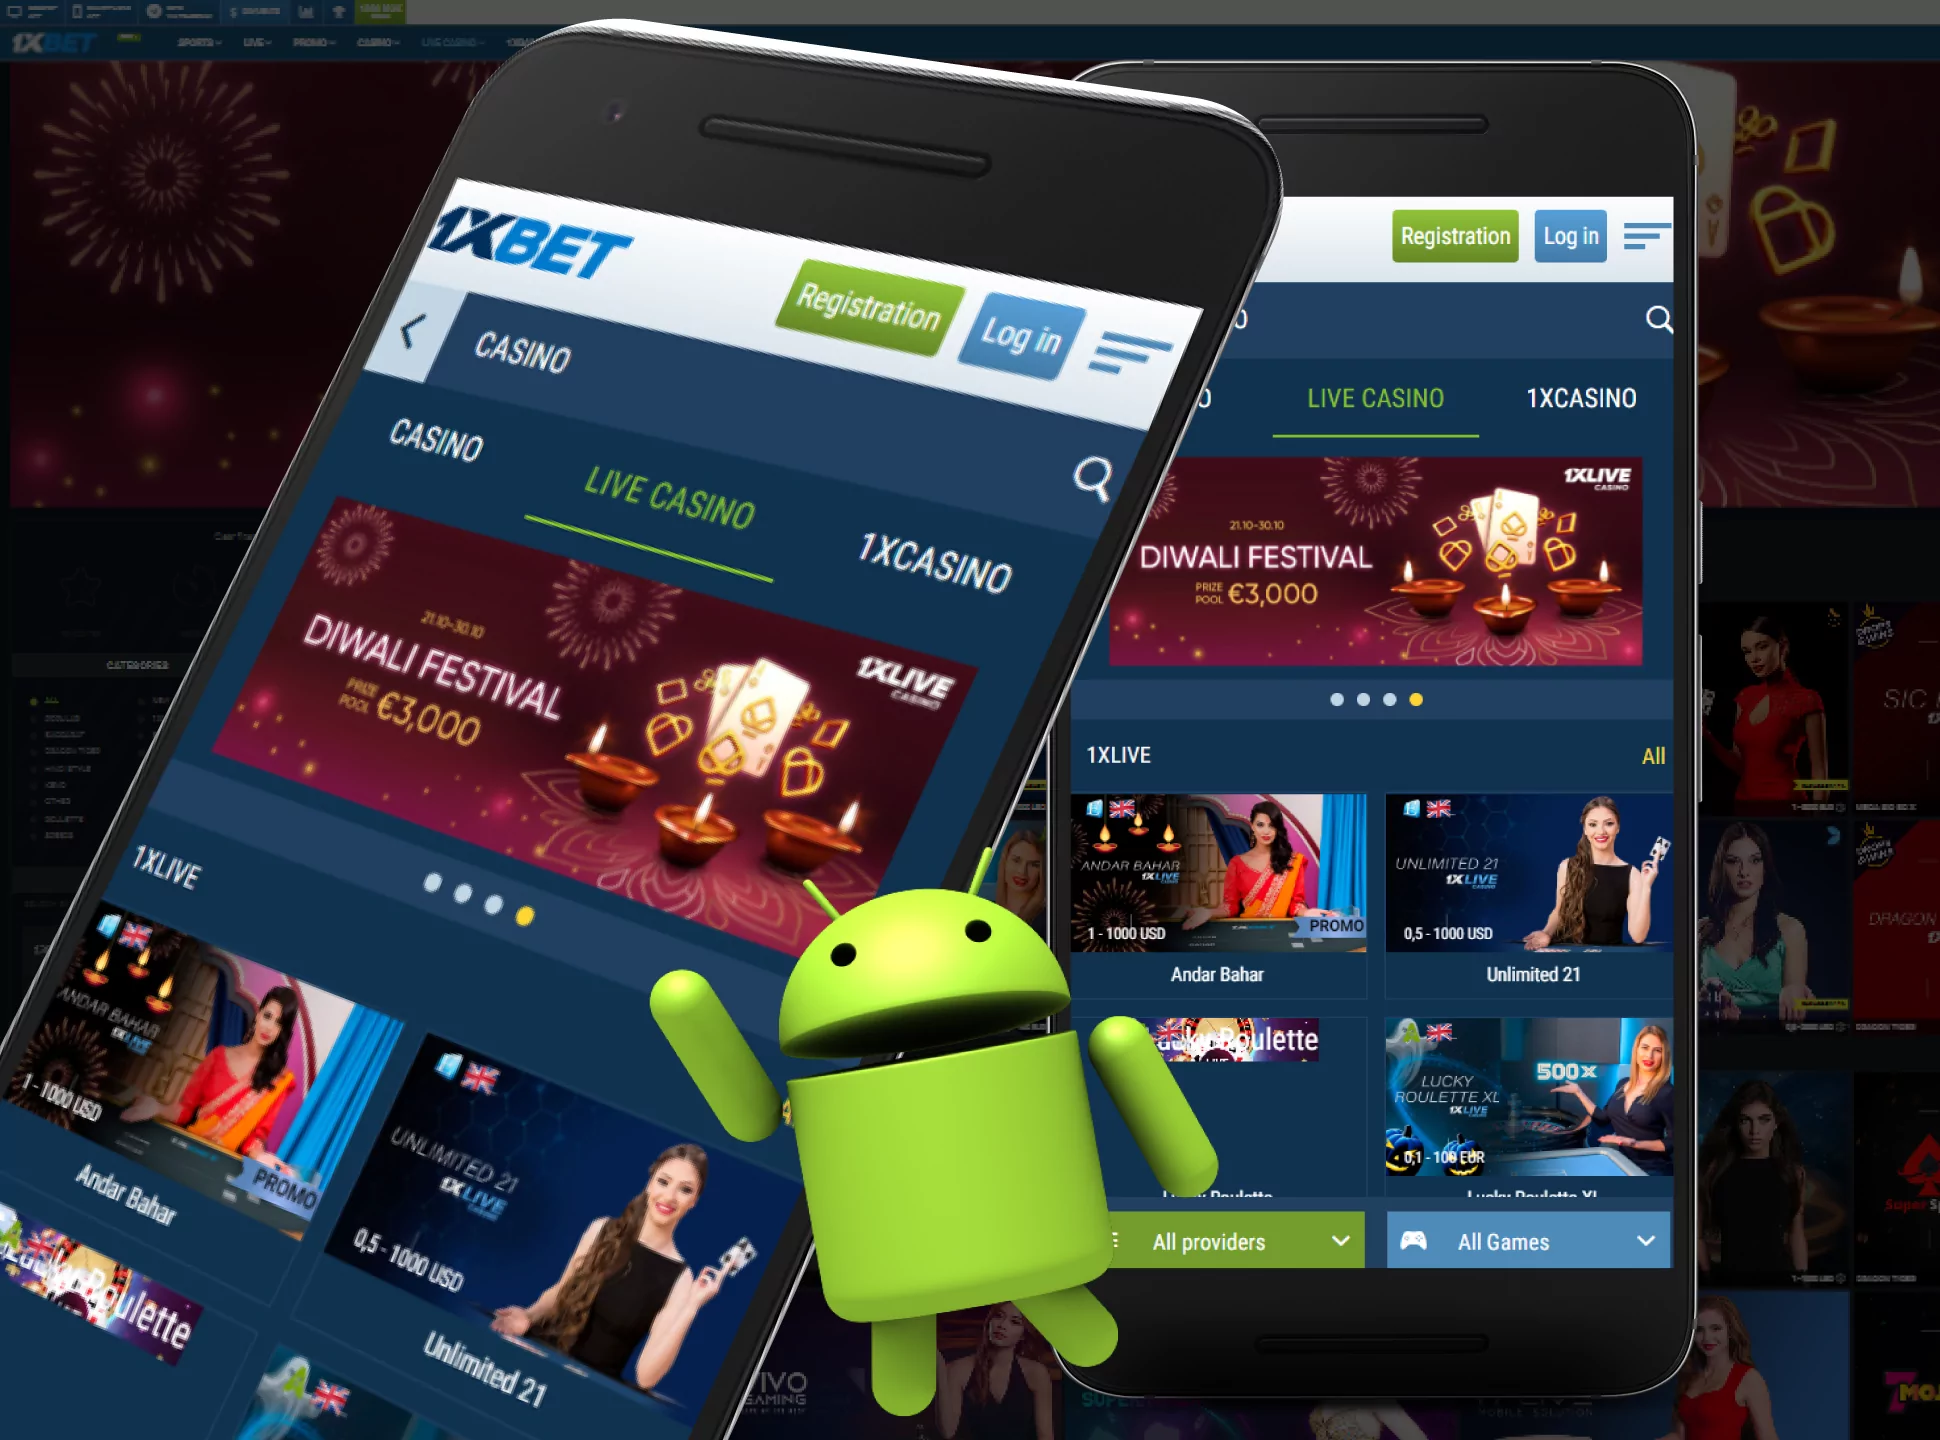 You can download the online casino app on your Android smartphone.